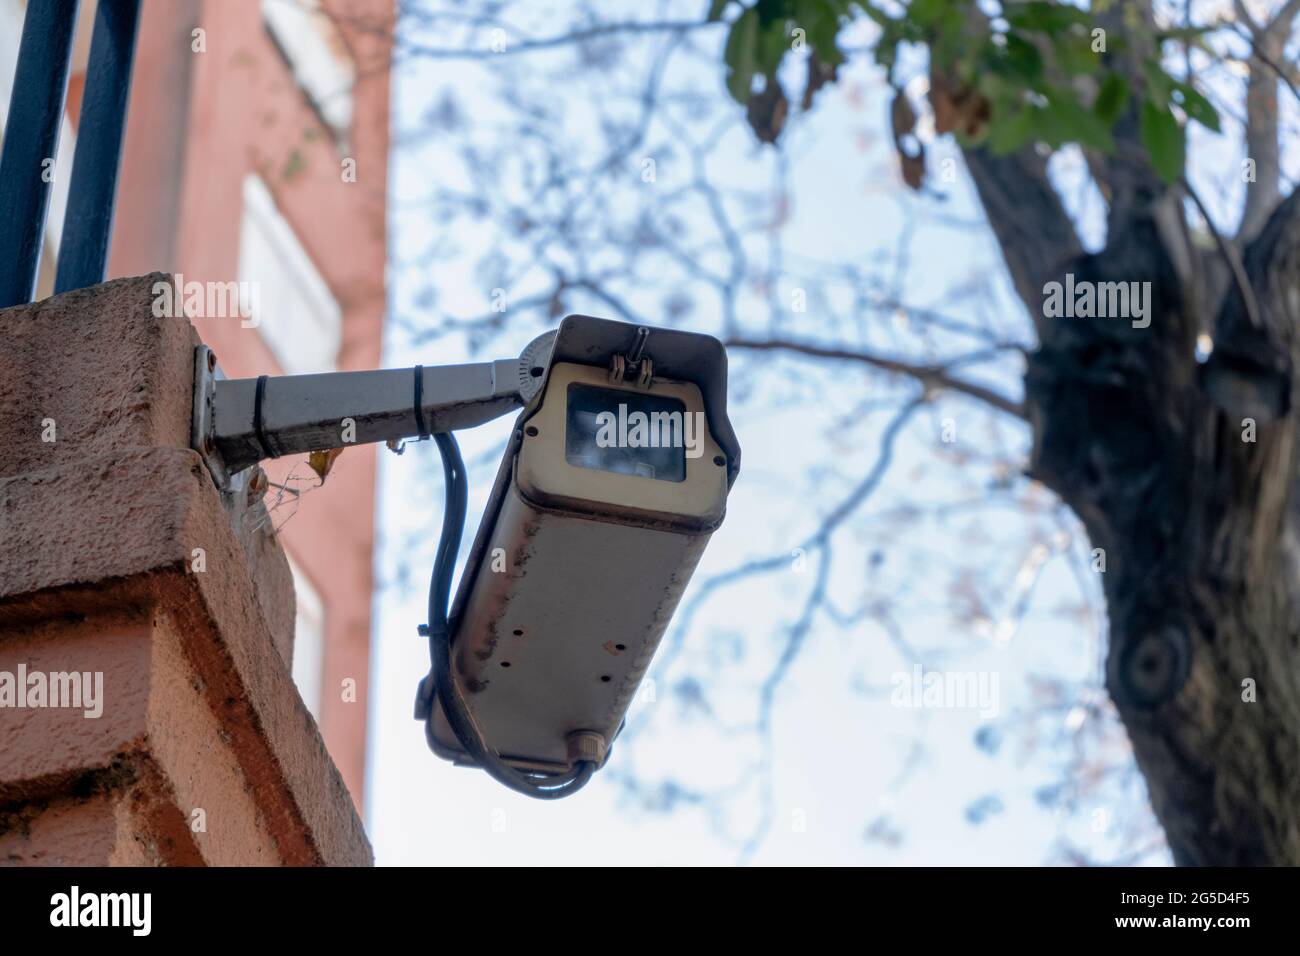 Outdoor surveillance or security camera installed on the external wall of a building. Concept security, remote surveillance, surveillance. Stock Photo